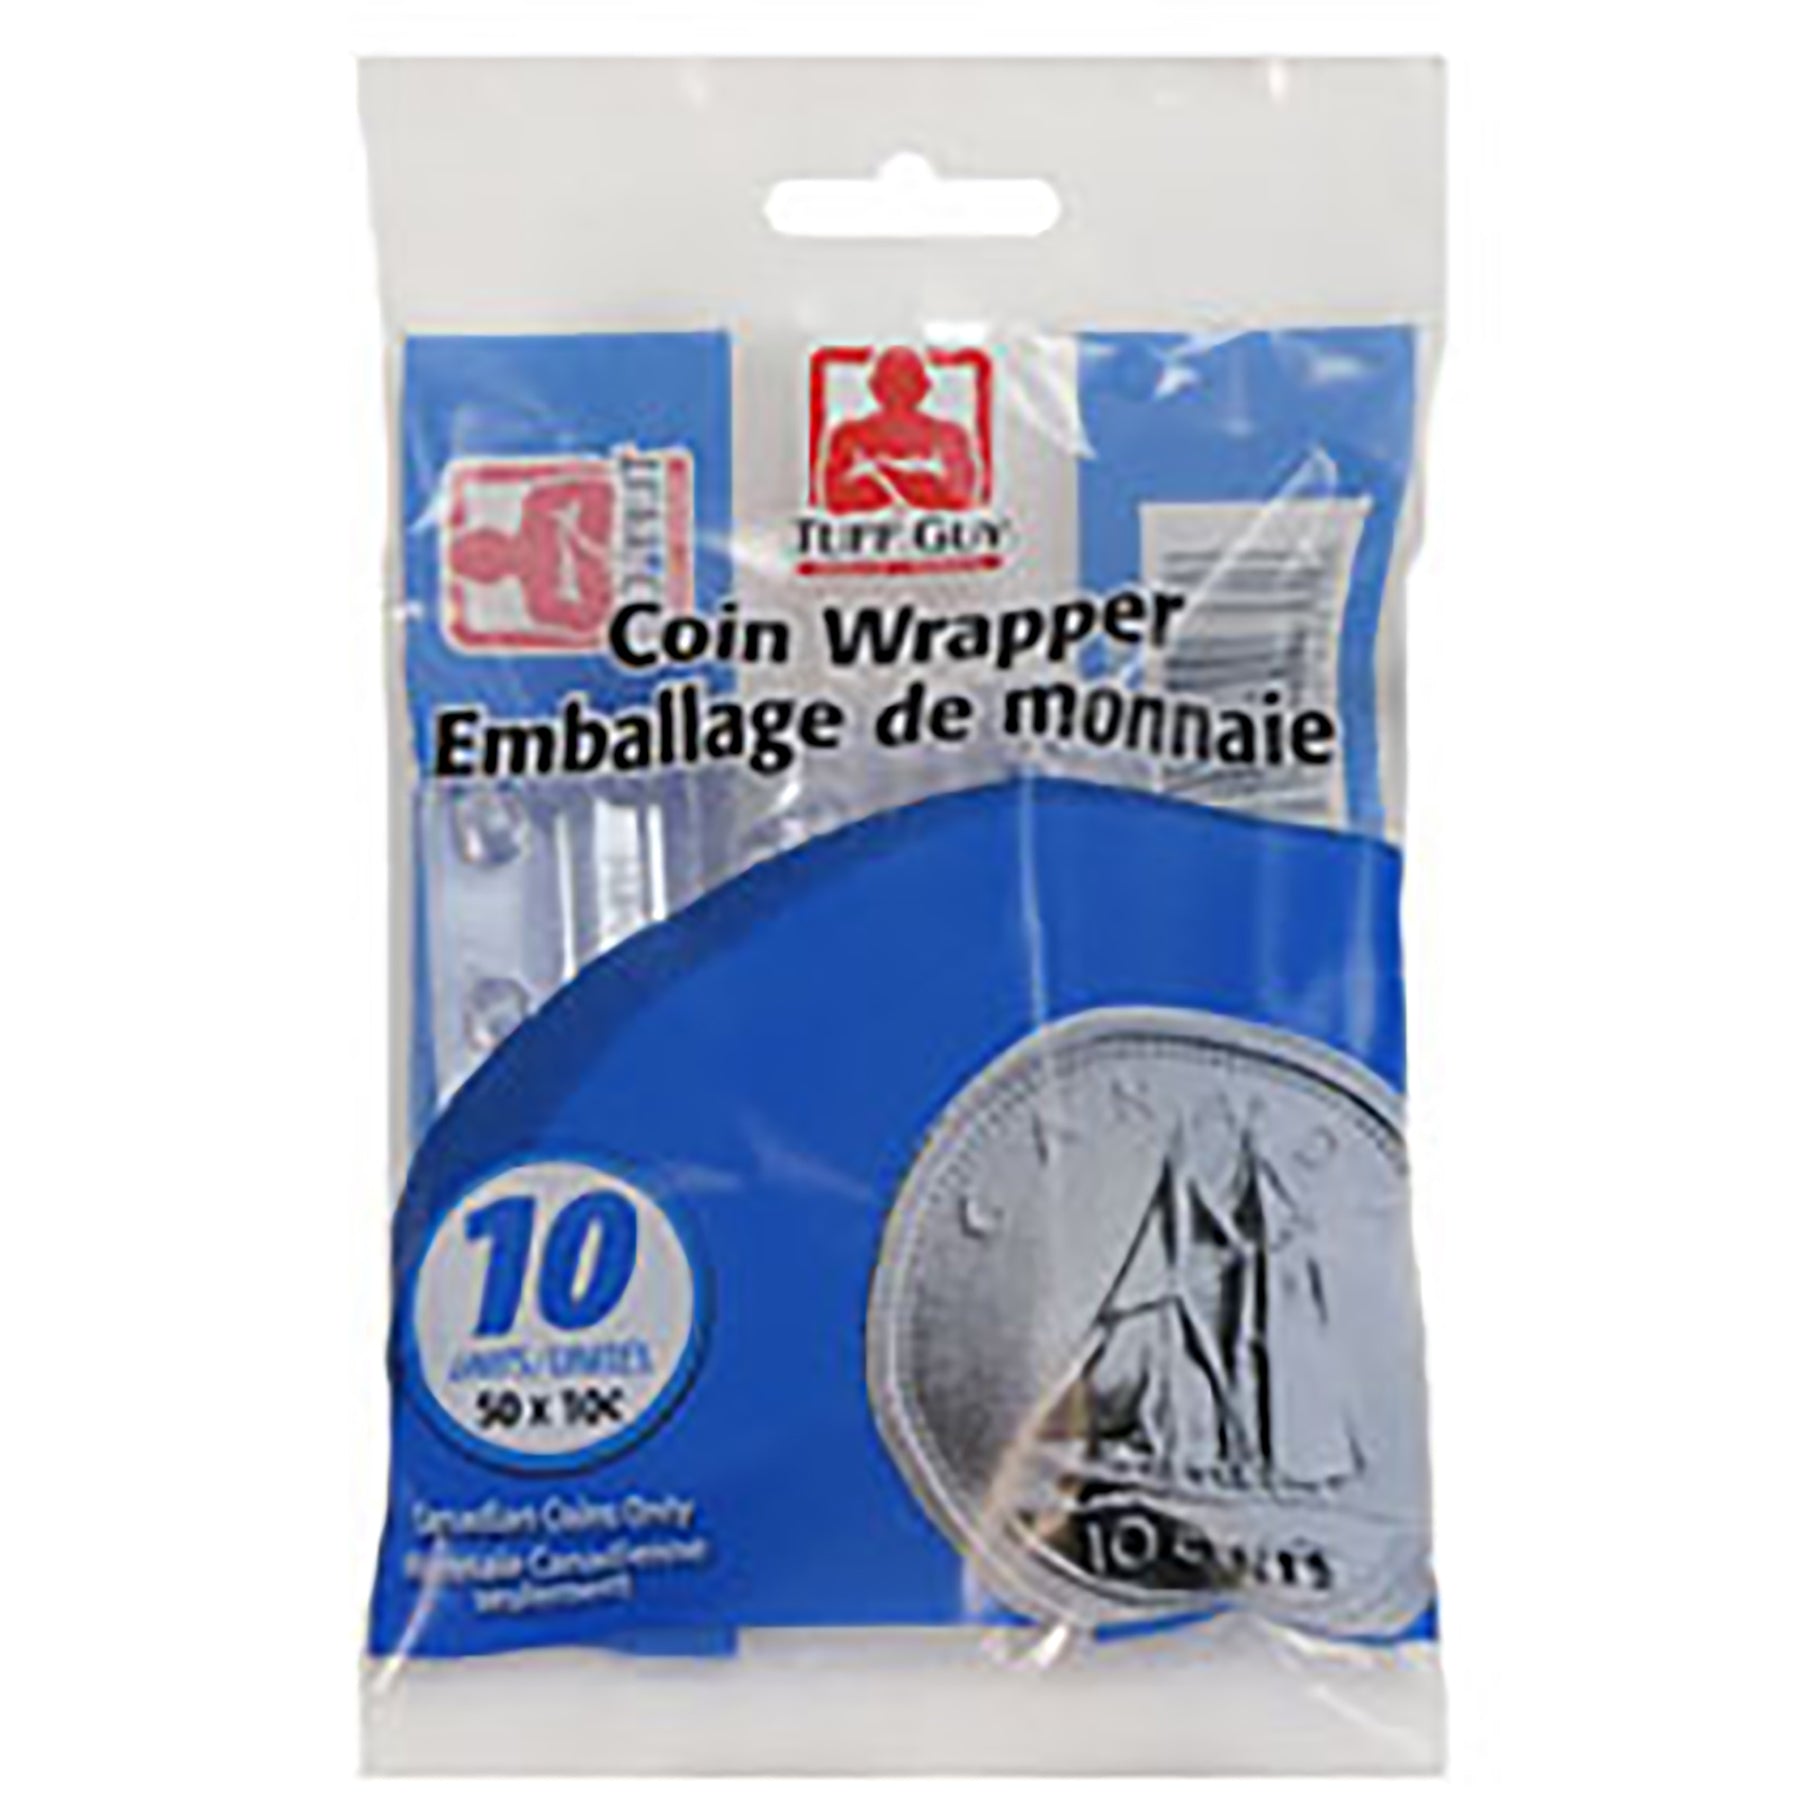 Tuff Guy 10 Coin Wrappers $0.10 Plastic